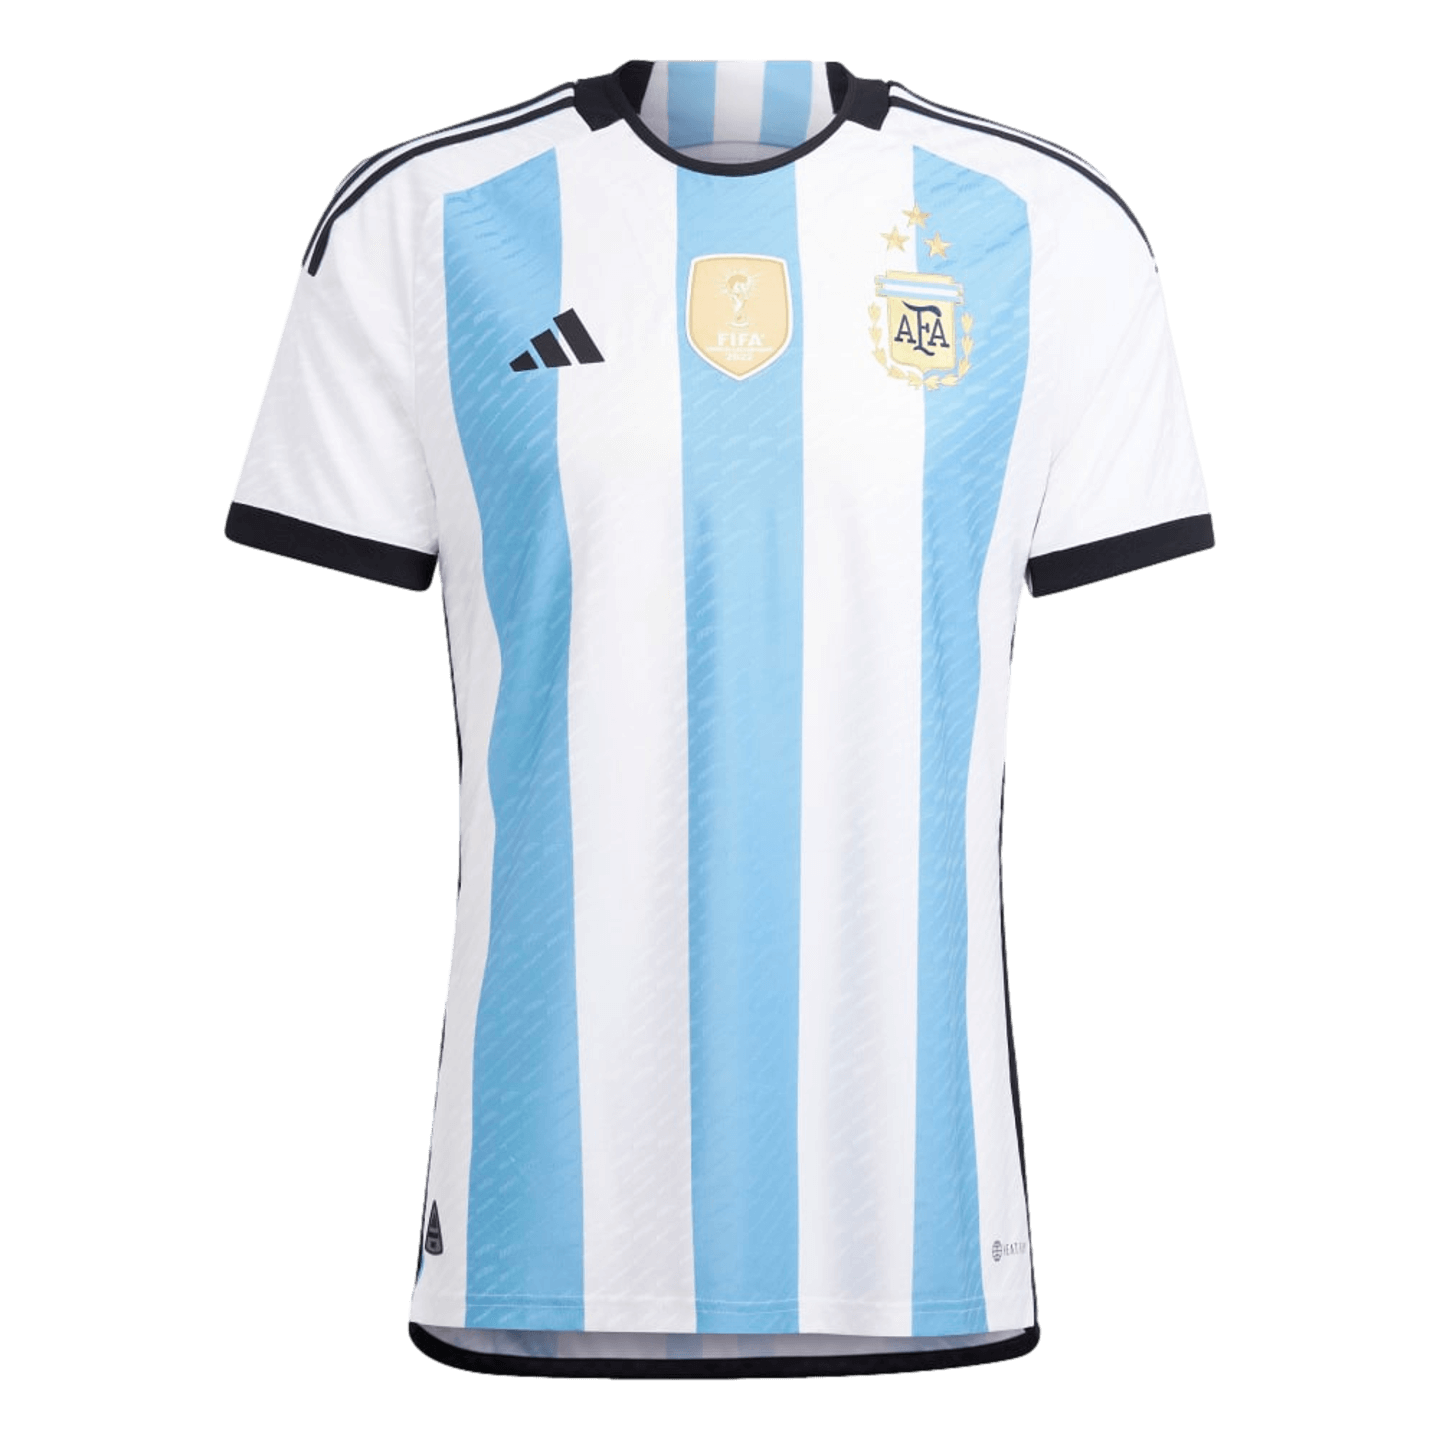 Adidas, Adidas Argentina 2022 3 Star Authentic Home Jersey